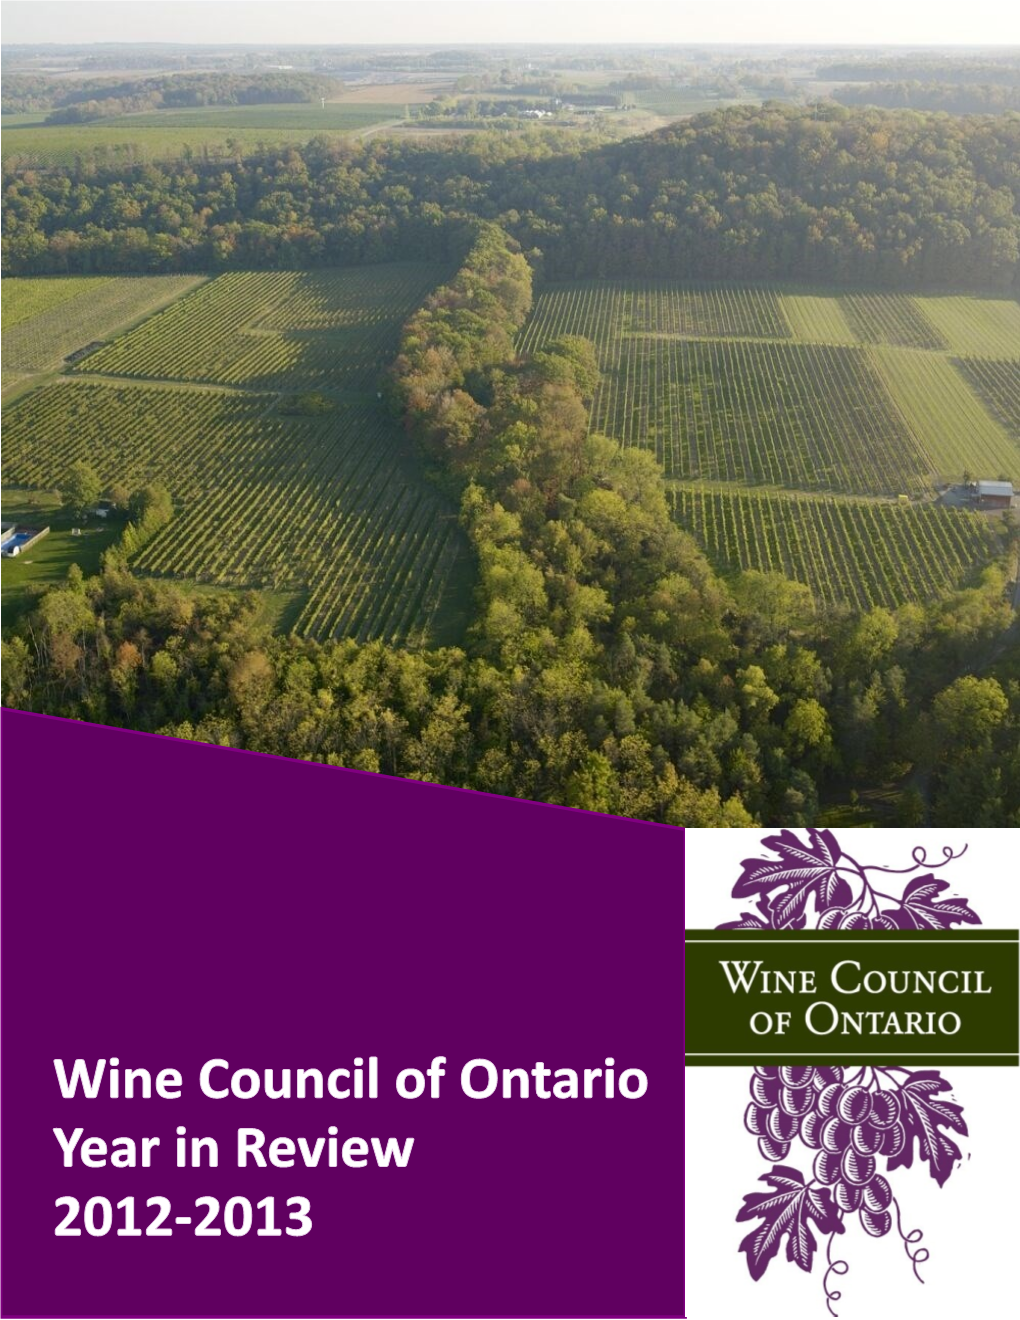 Wine Council of Ontario - 2012-2013 Annual Review